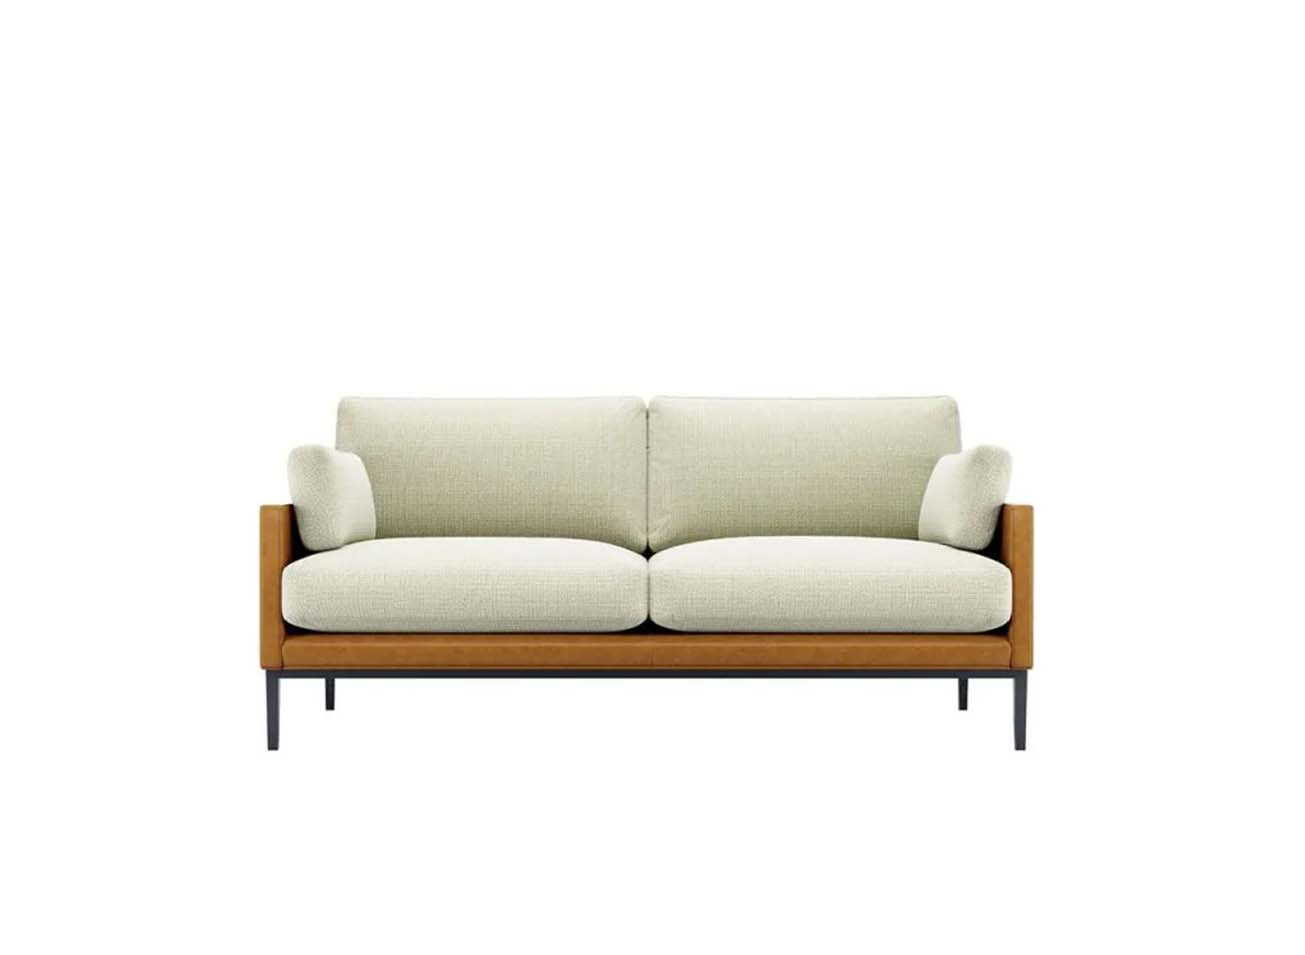 Exploring Contemporary Sofa Designs: Material Descriptions and Shopping Recommendations